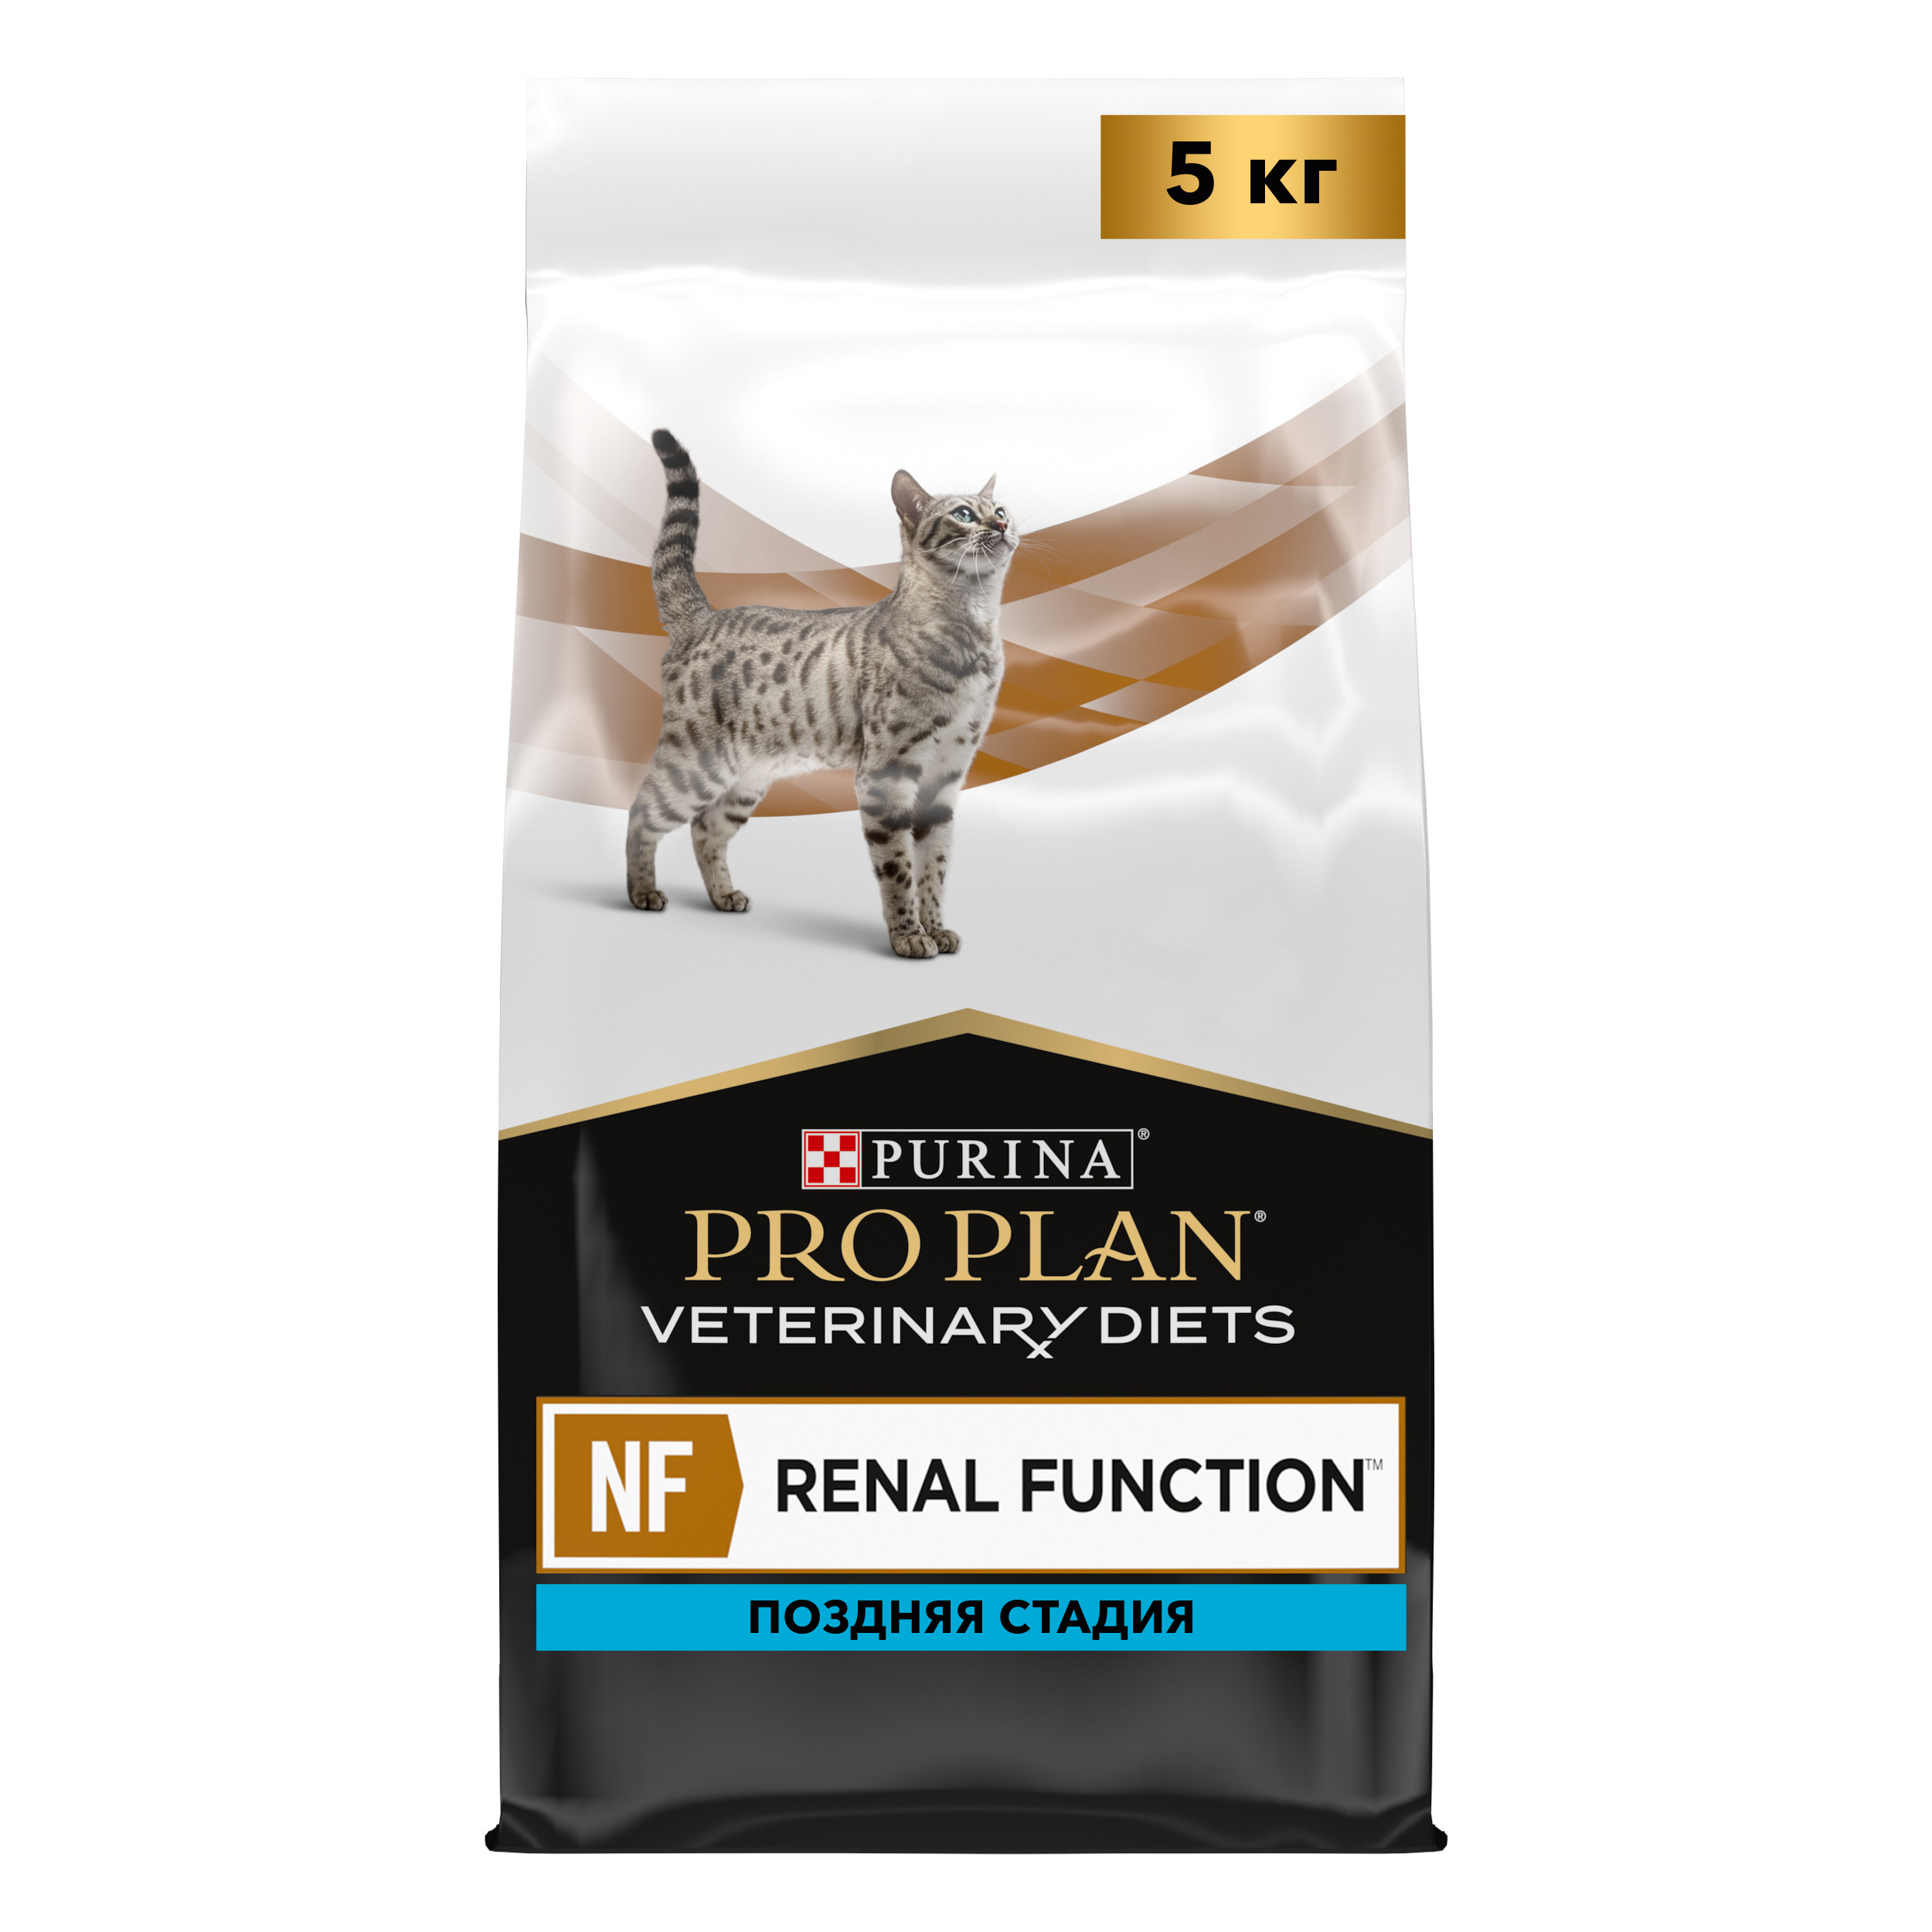 Pro plan nf renal function advanced care